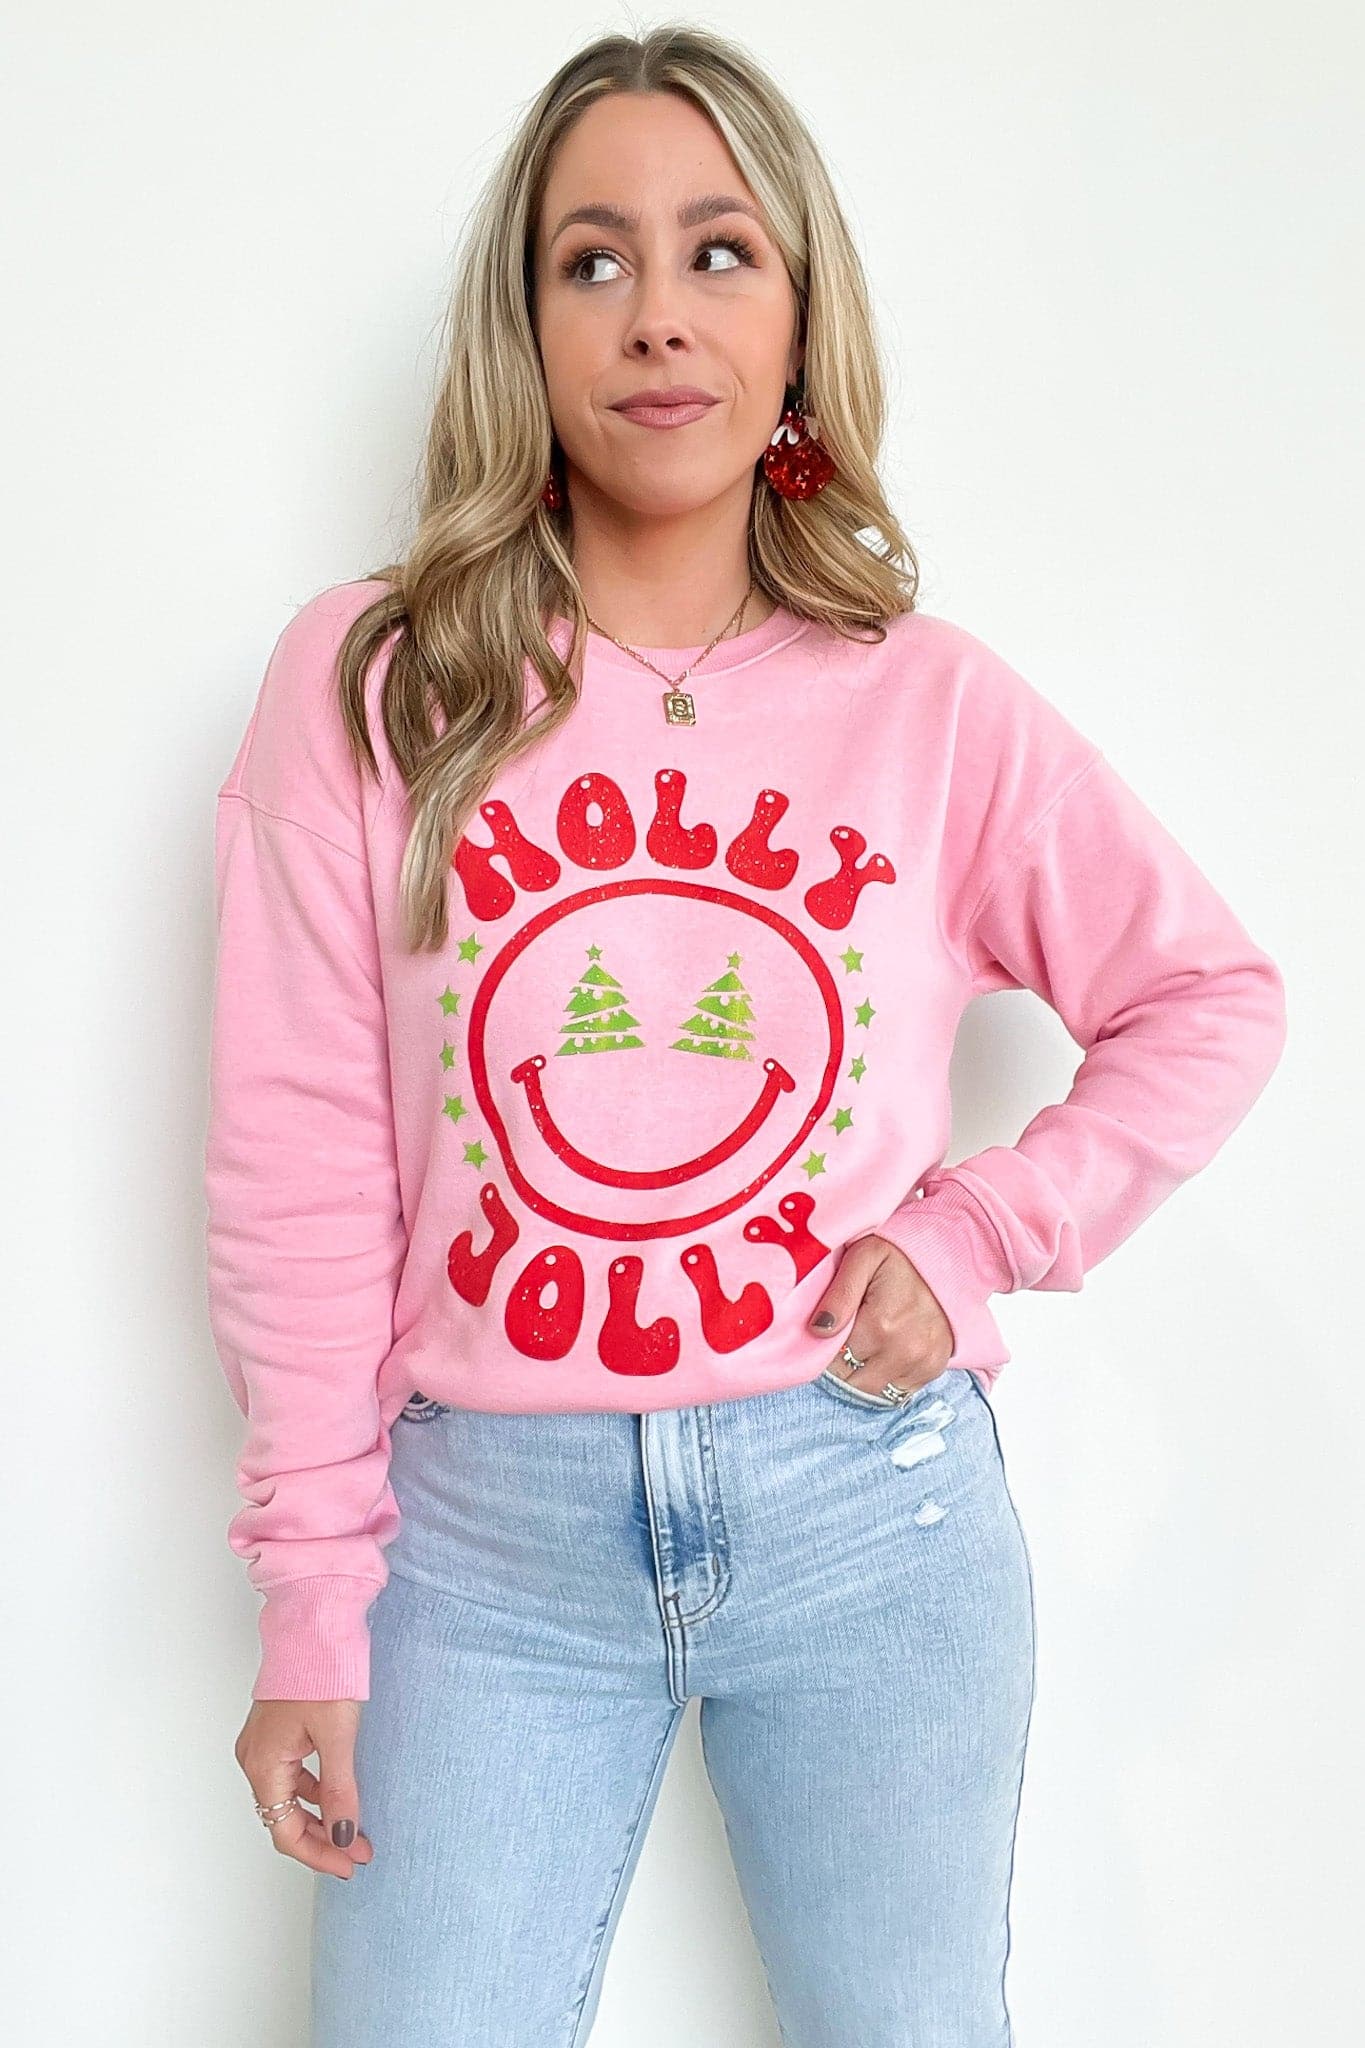  Holly Jolly Smile Oversized Graphic Sweatshirt - FINAL SALE - Madison and Mallory